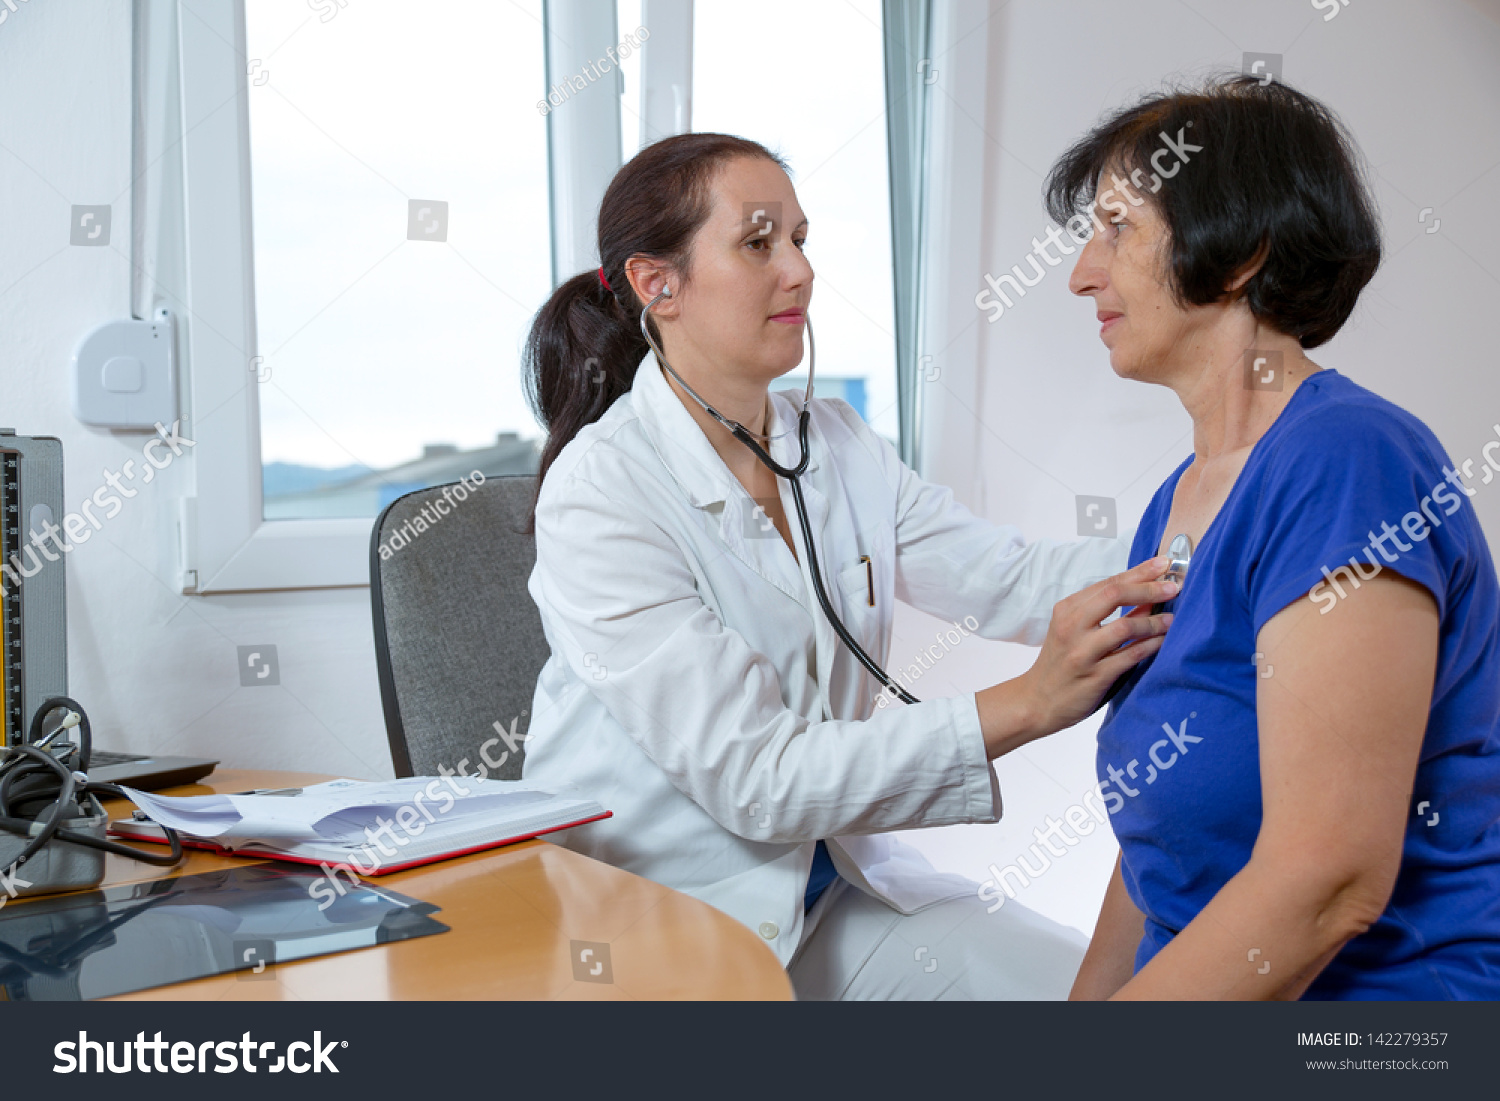 Female Doctor And Patient Stock Photo 142279357 Shutterstock